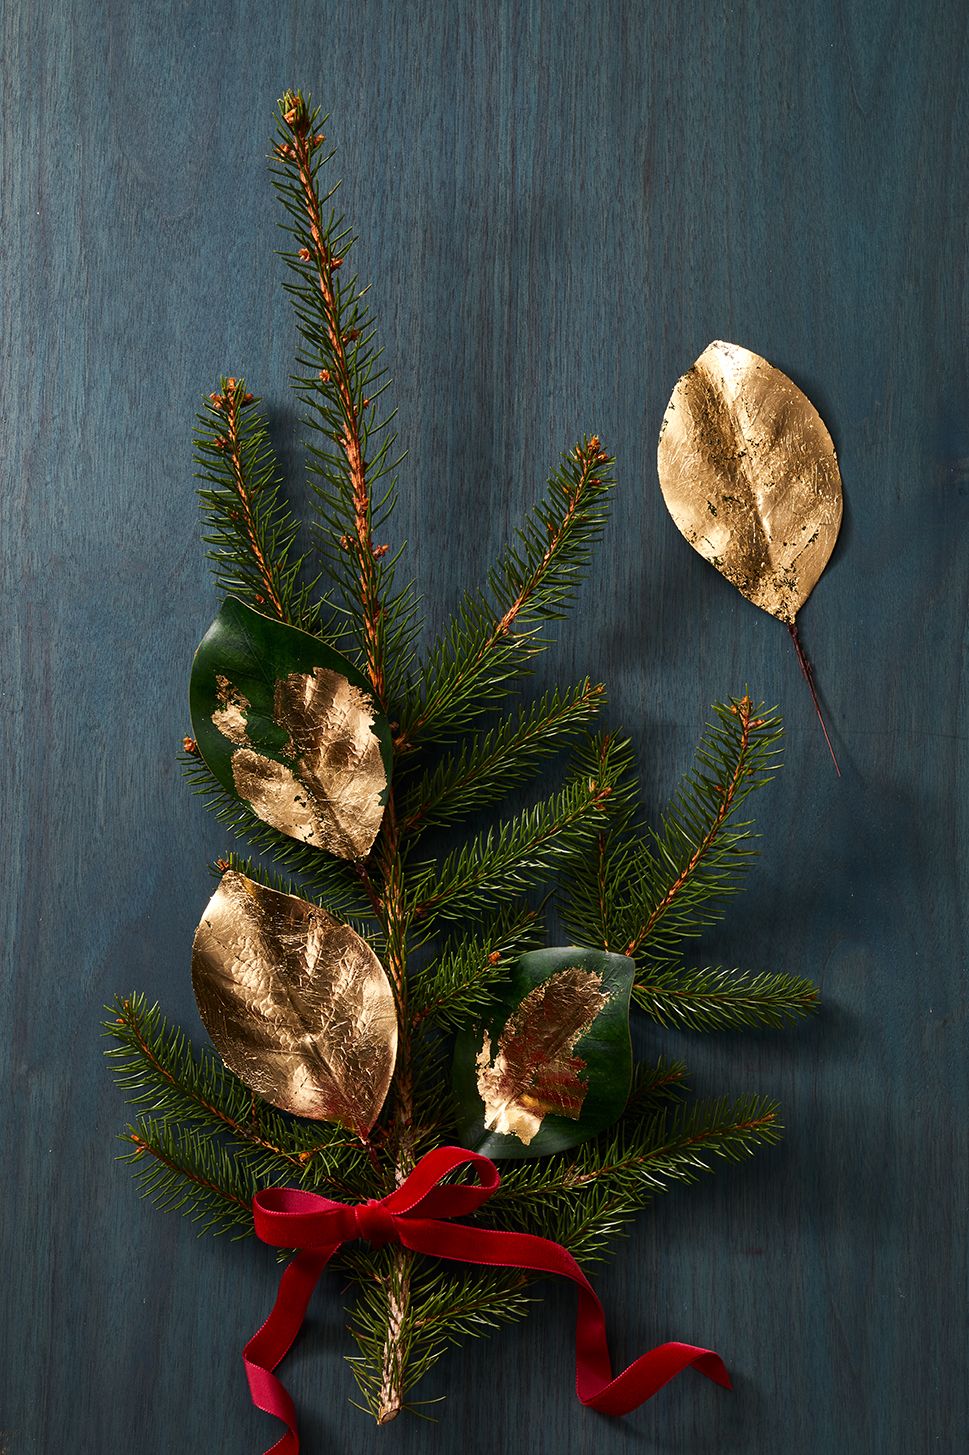 DIY Christmas gold leaf on pine tree branches